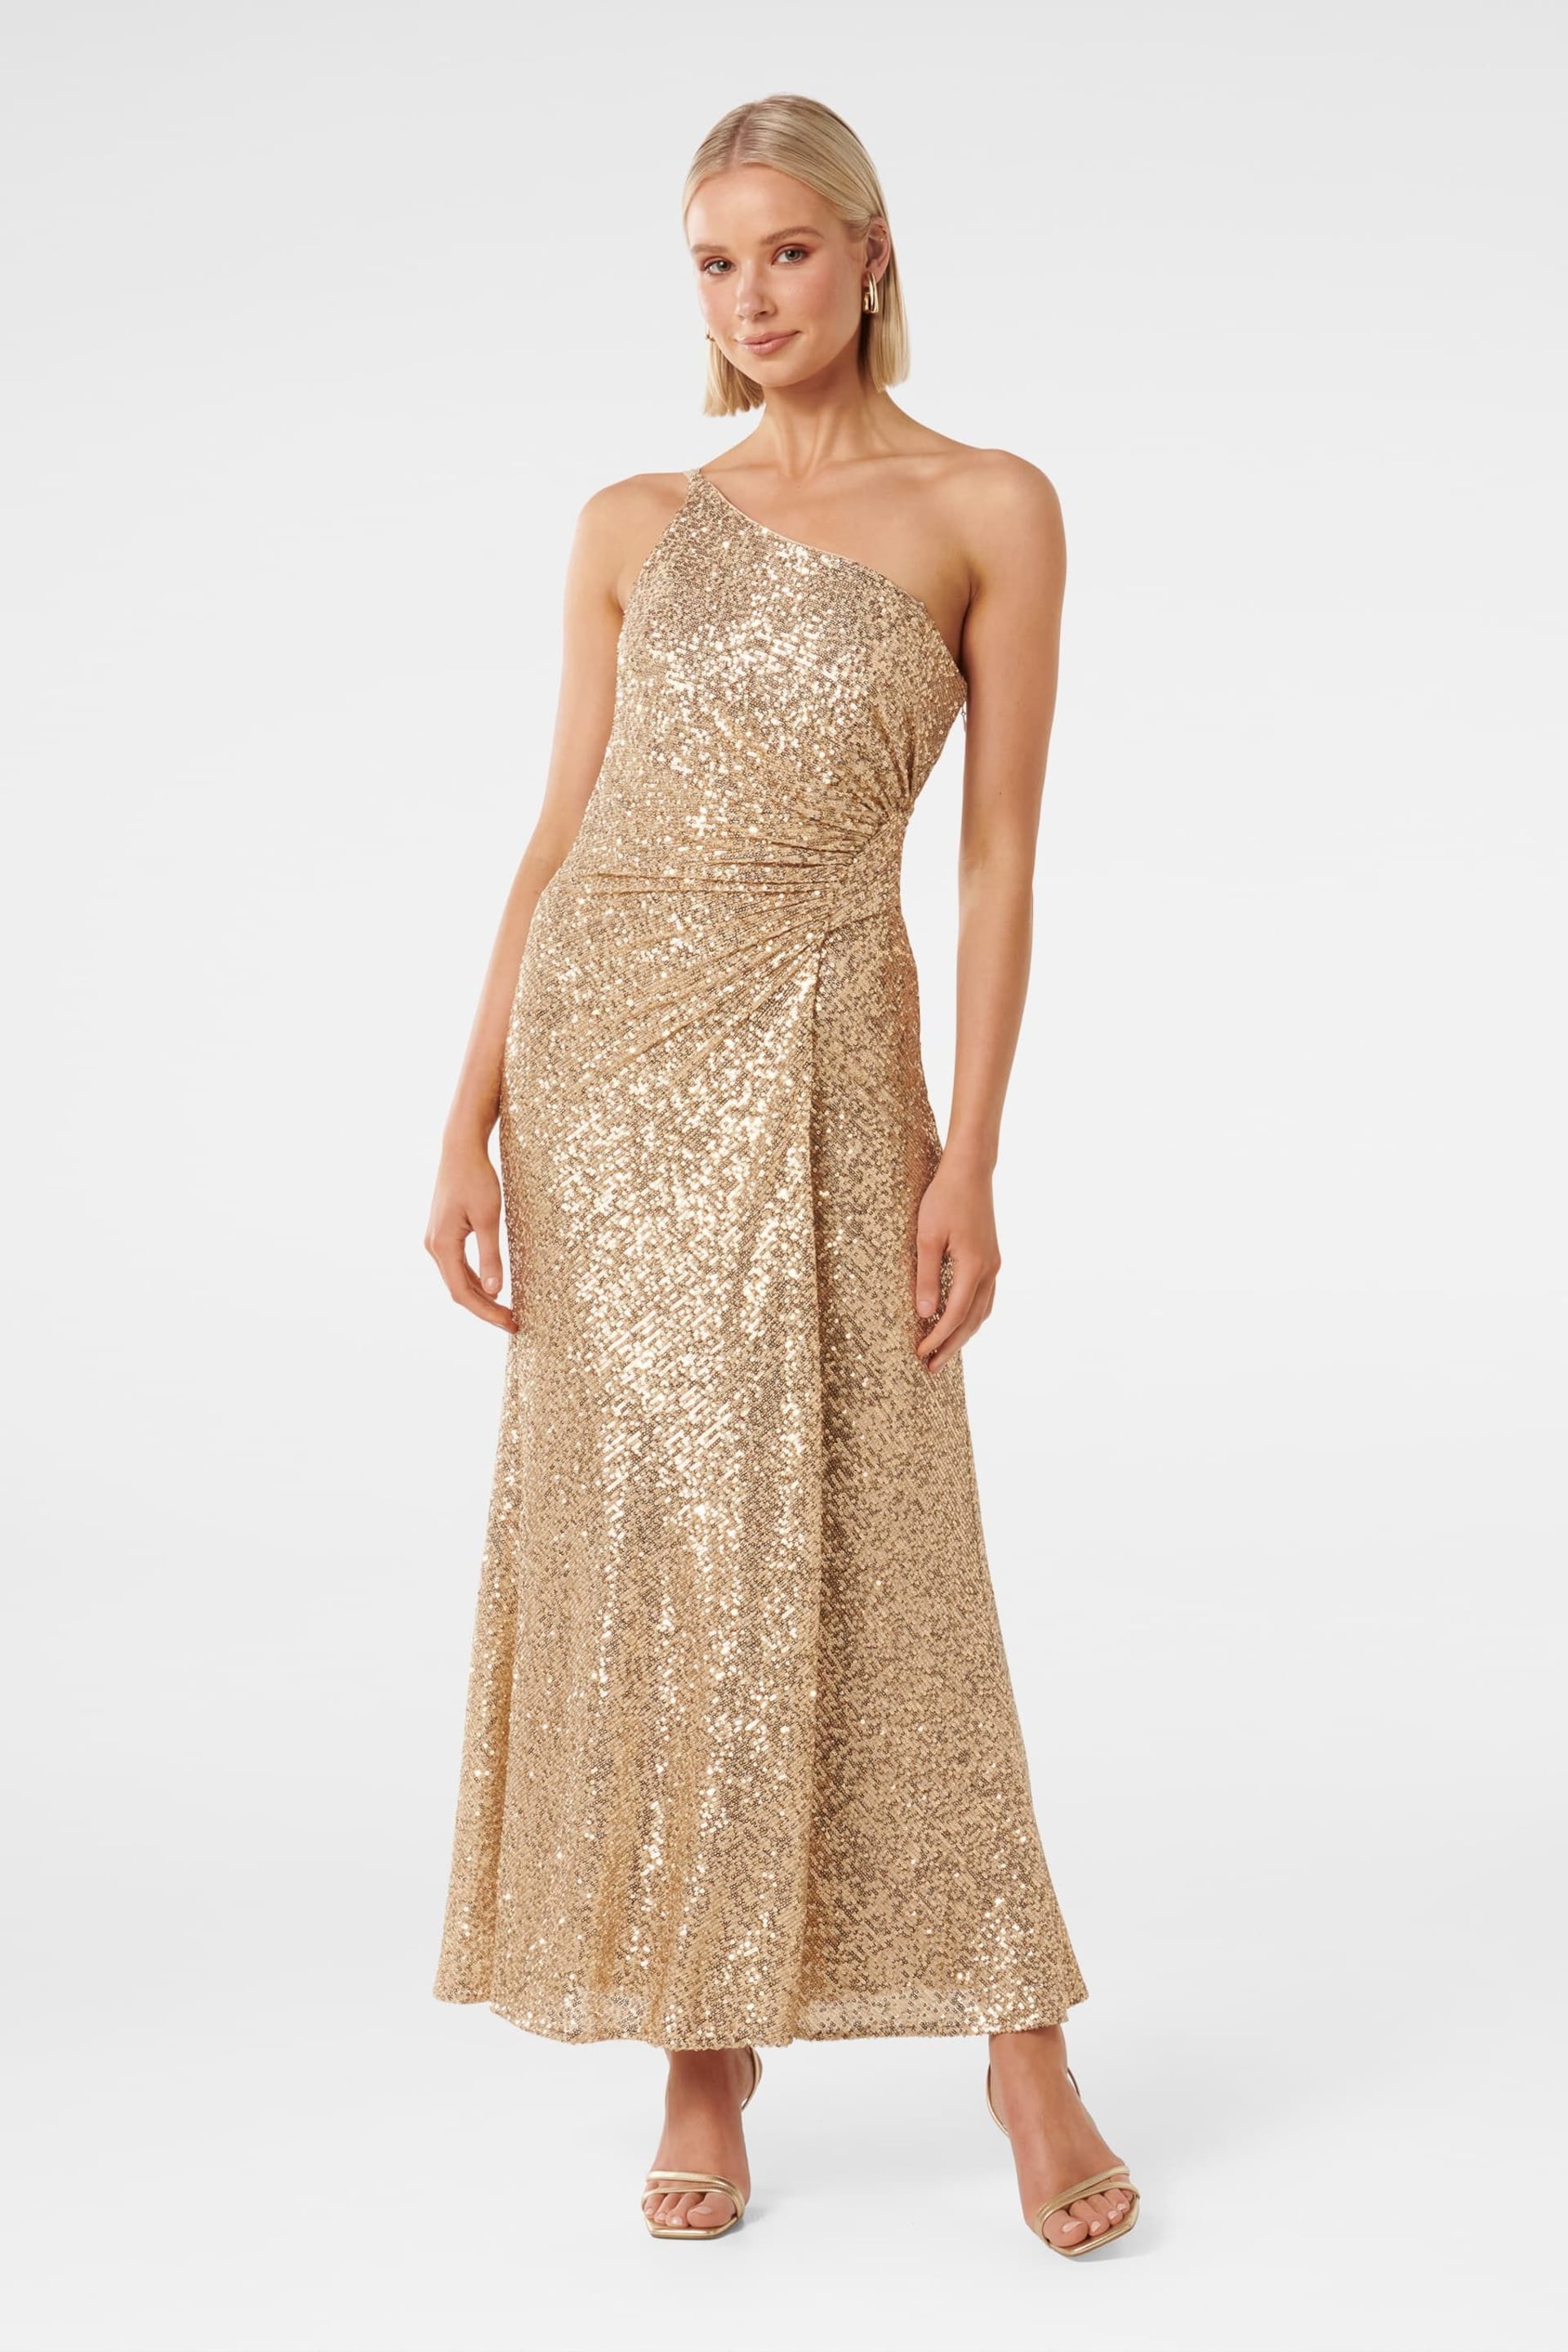 Forever New Gold Carolyn Sequin Asymmetrical Gown - Image 1 of 4